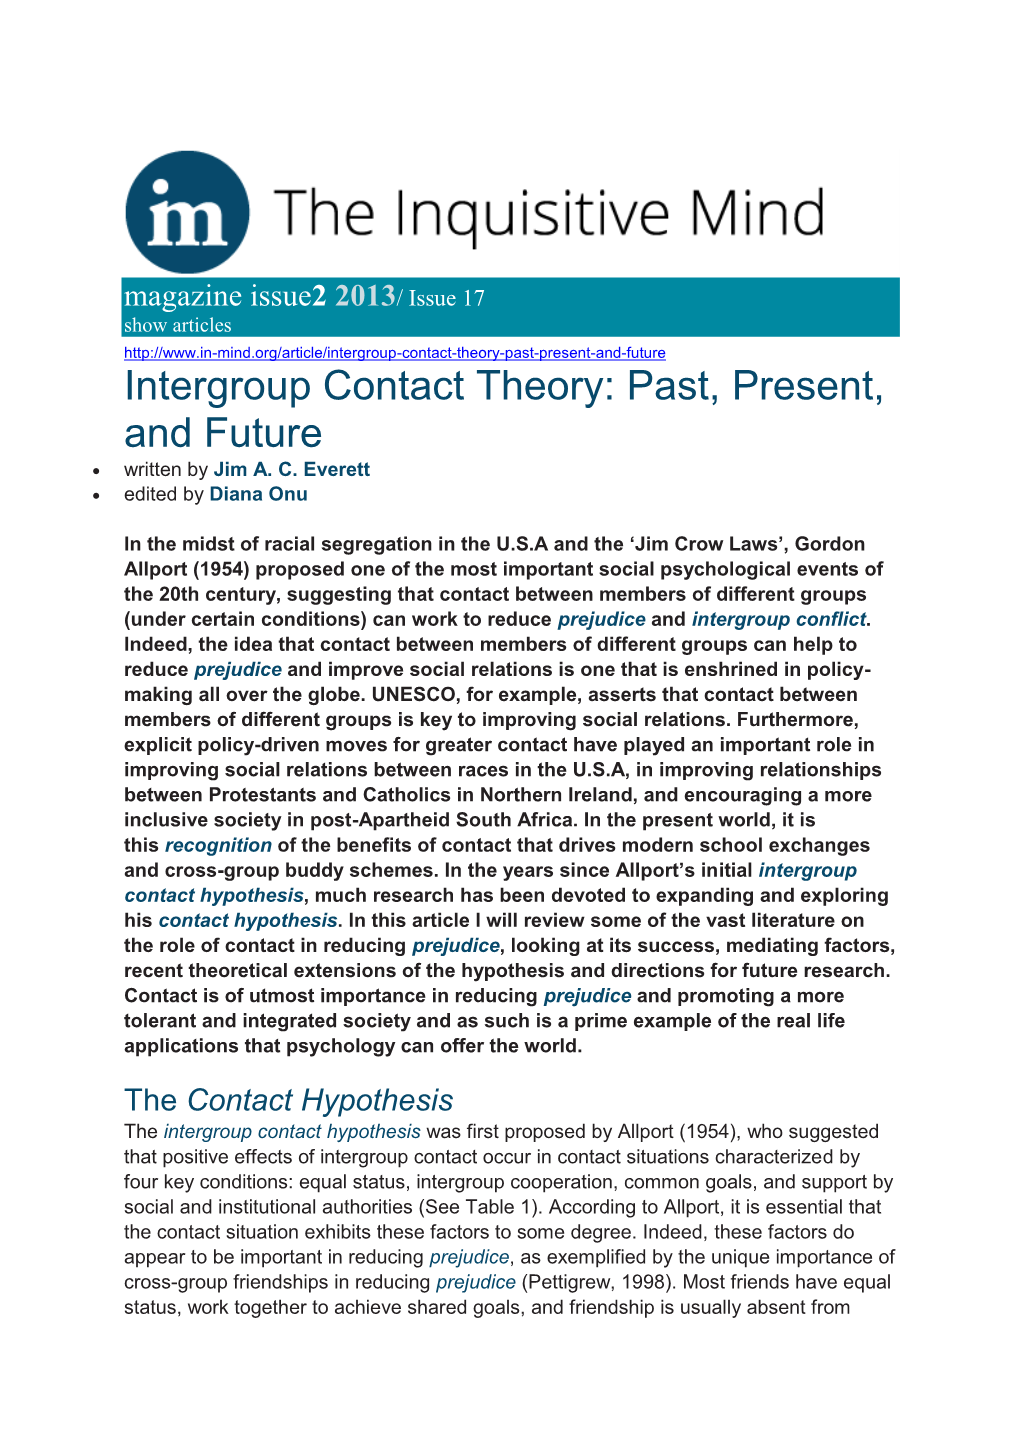 Intergroup Contact Theory: Past, Present, and Future  Written by Jim A